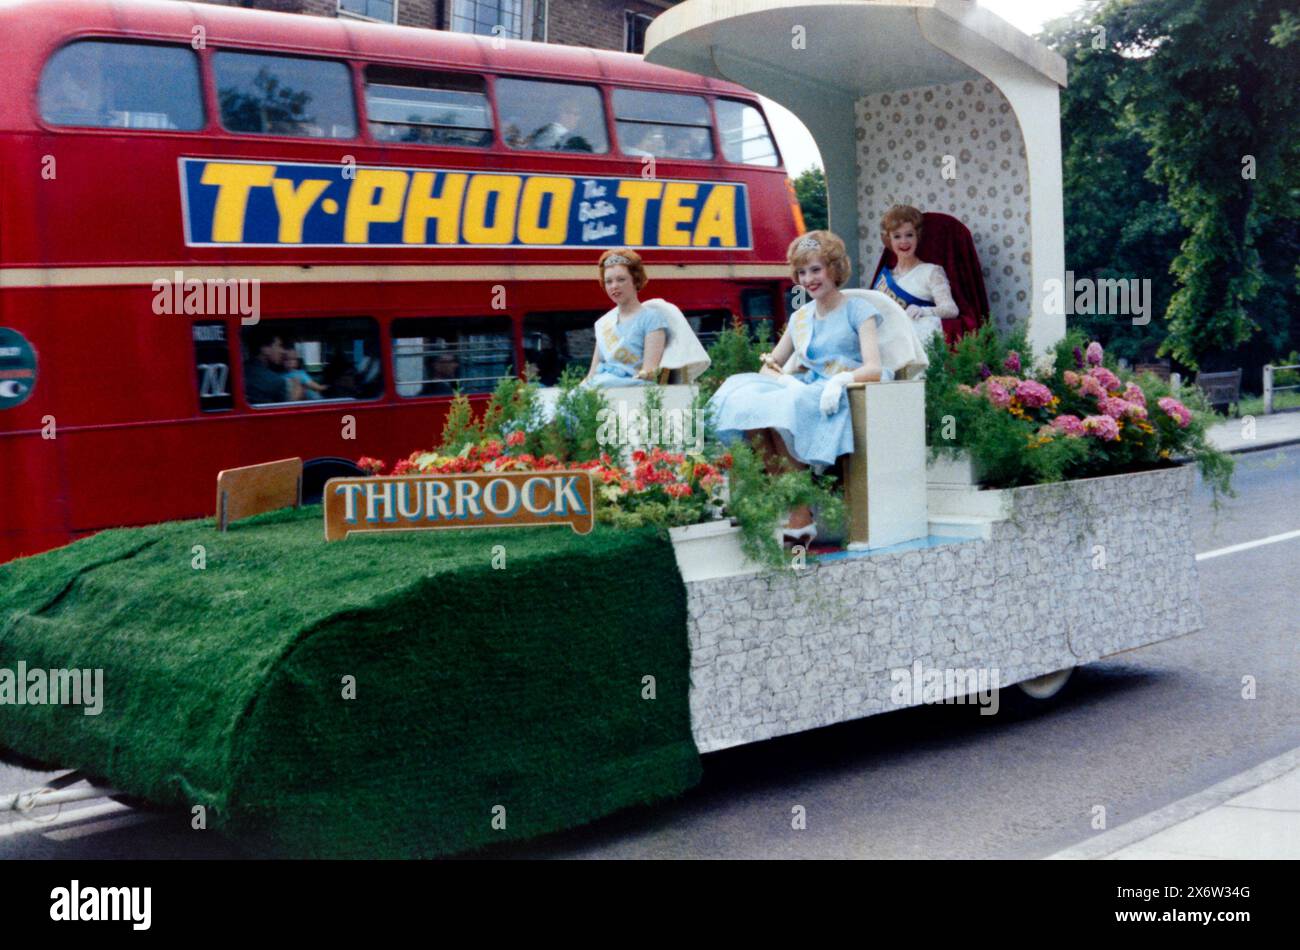 Thurrock Carnival Grand Parade 1963 passing through Grays, Essex, UK. Thurrock Carnival Queen Dawn Prior and Maids of Honour Ann Eveleigh and Irene McKenna on floral float. Traditional English local community event. Stock Photo